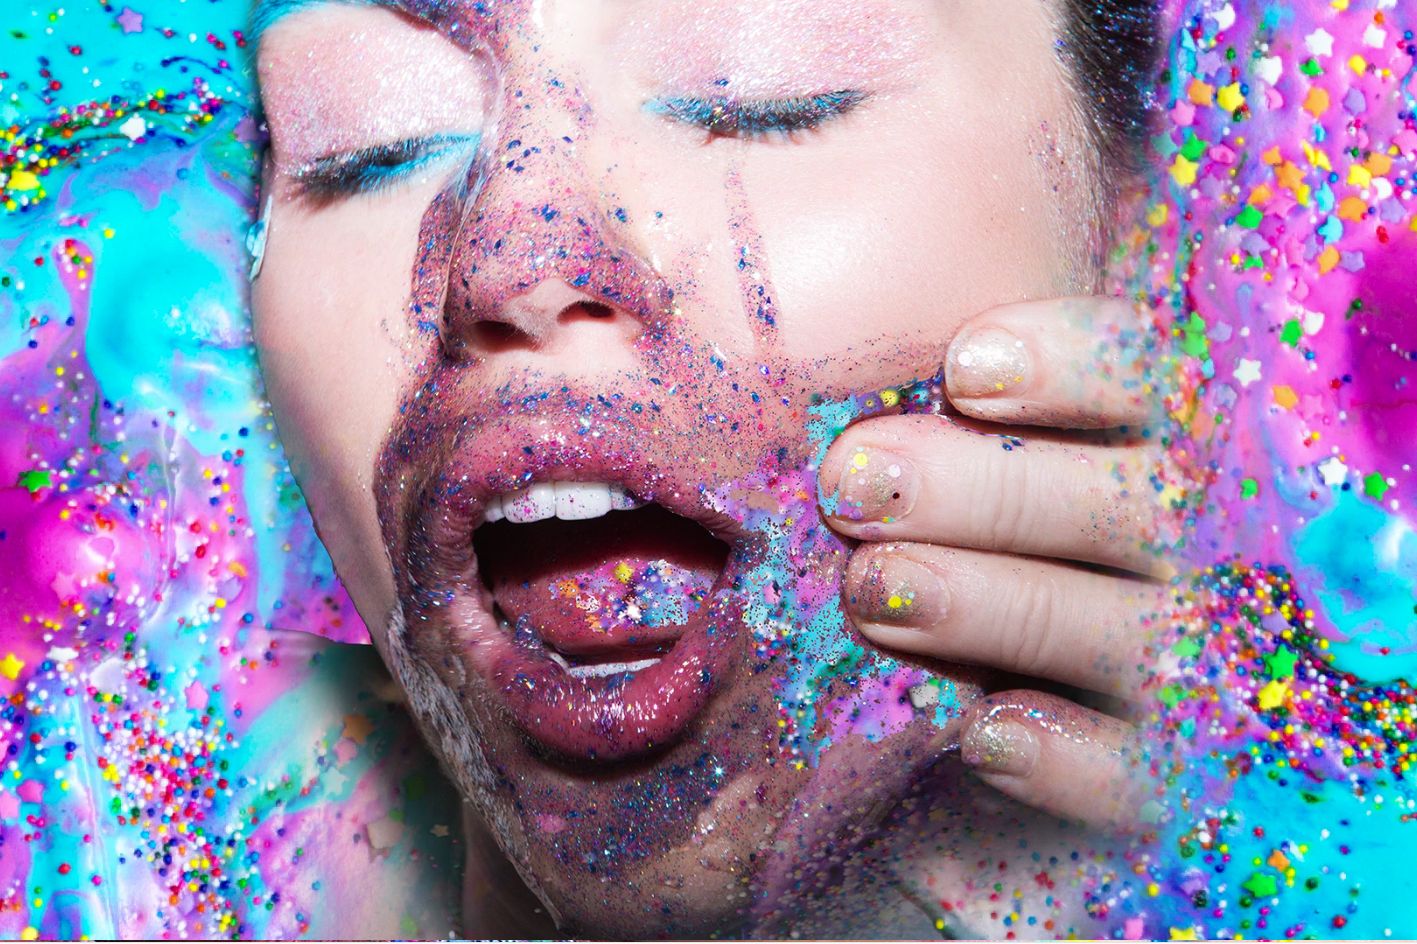 Miley Cyrus's Dead Petz Is Hard to Like, or Even Endure